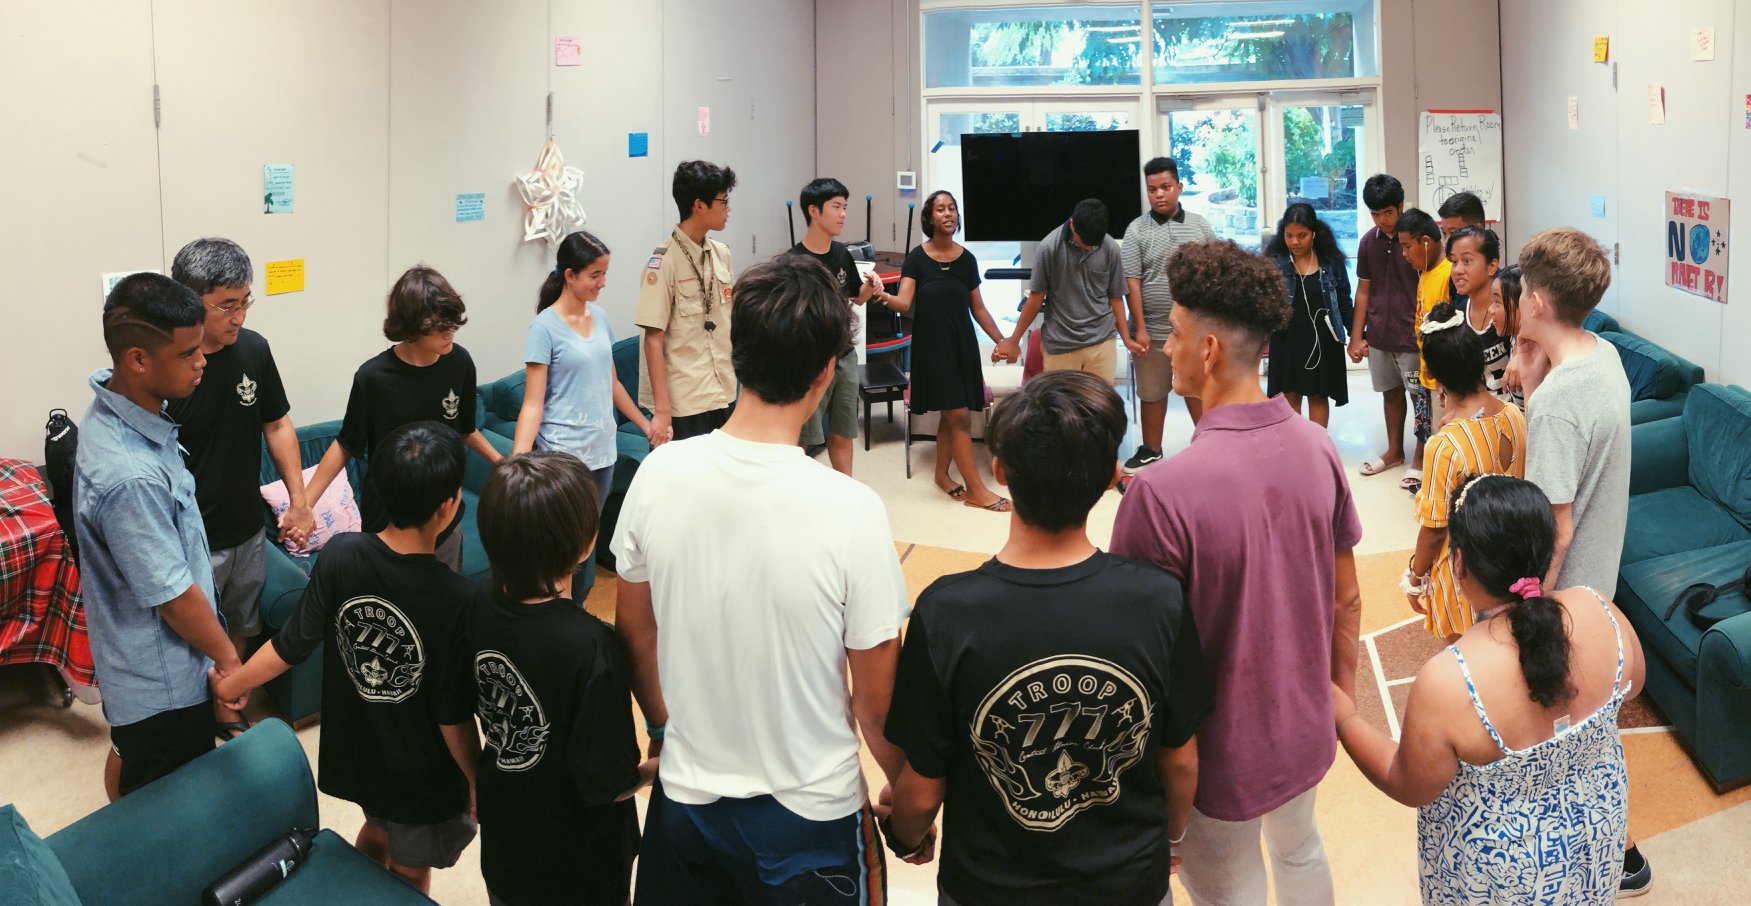 youth standing in a circle, hands joined